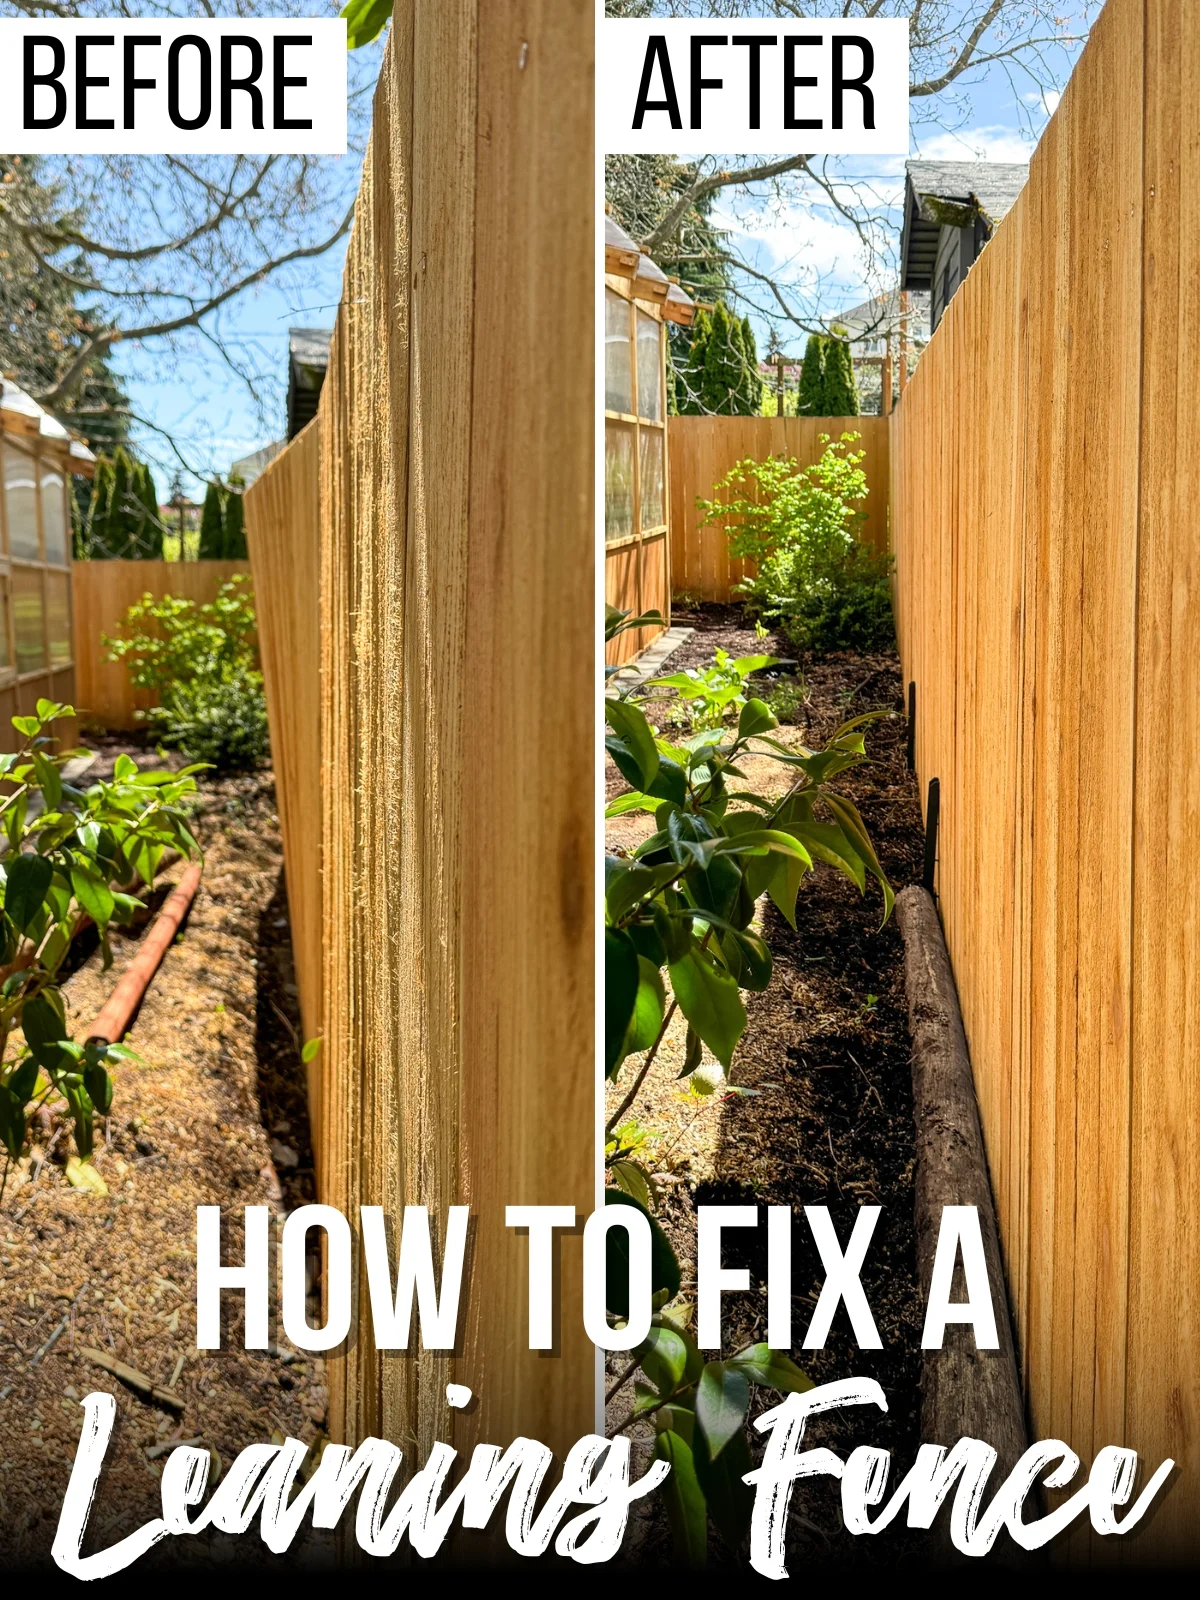 how to fix a leaning fence post